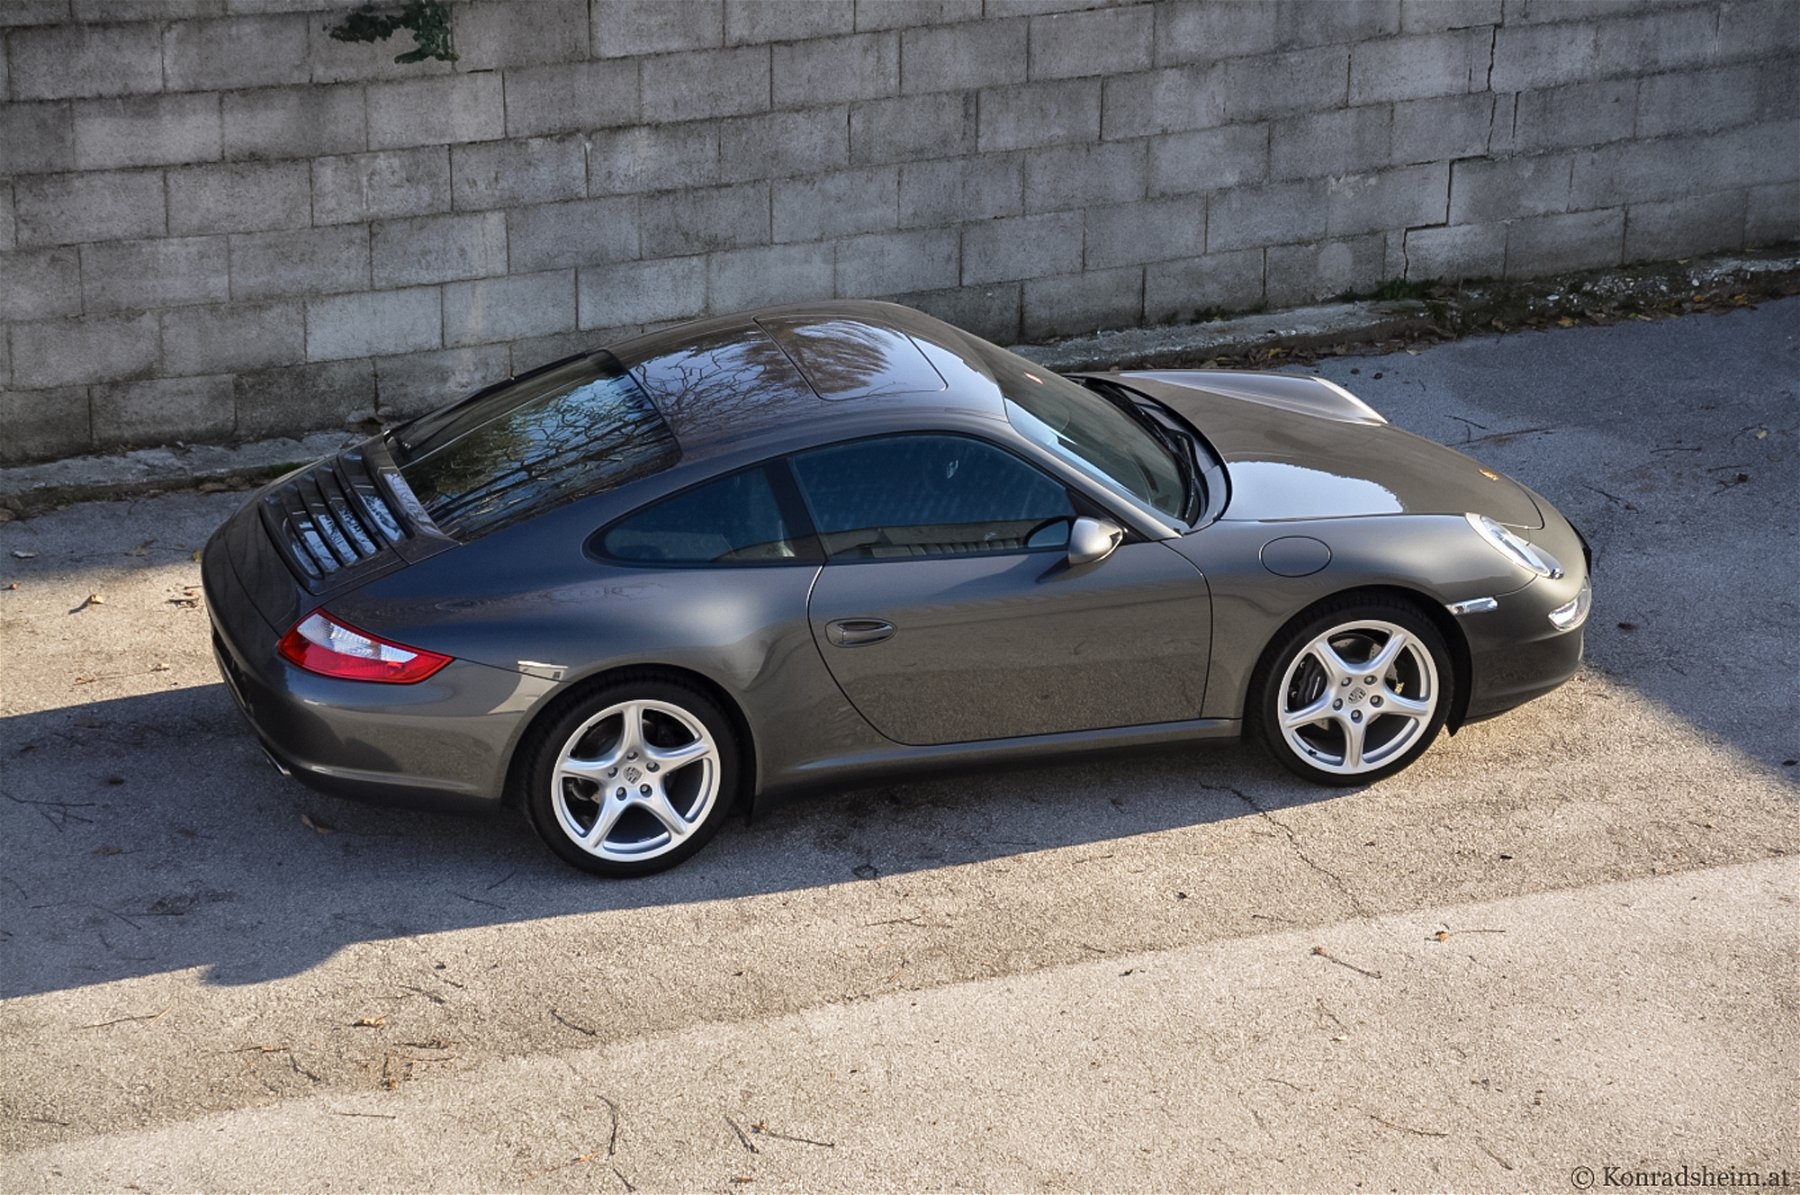 Porsche 997.1 Carrera (S) – Buyer’s guide – 5 things to consider